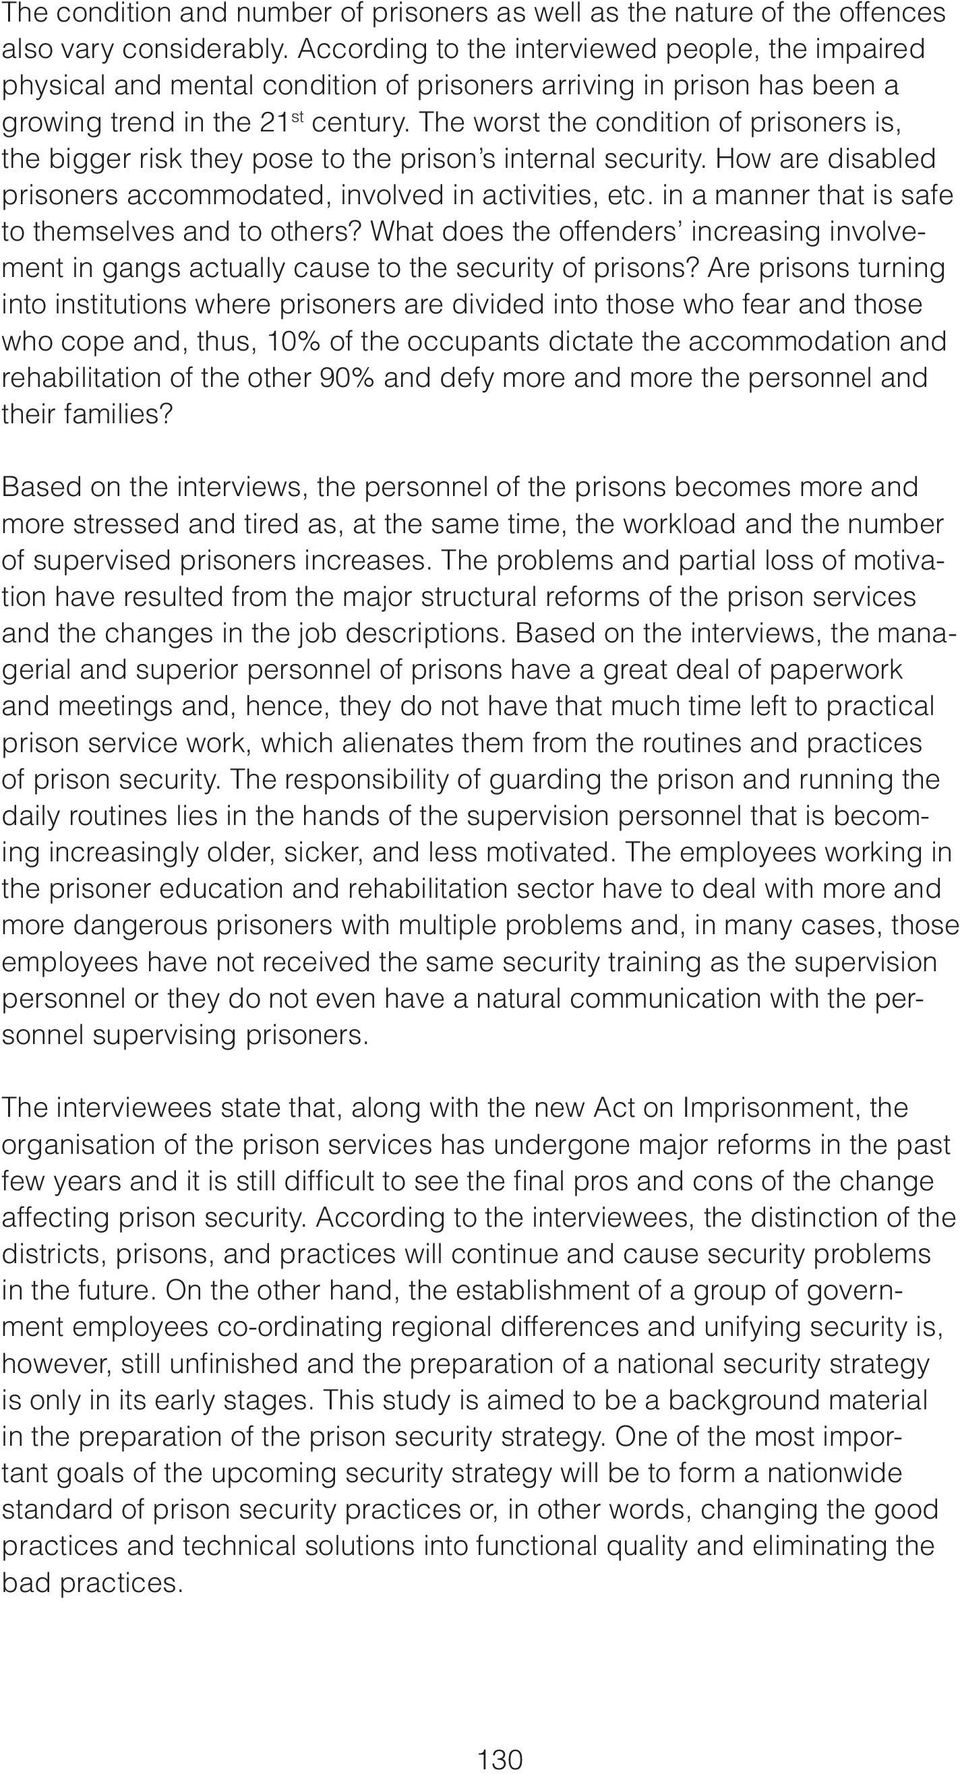 The worst the condition of prisoners is, the bigger risk they pose to the prison s internal security. How are disabled prisoners accommodated, involved in activities, etc.